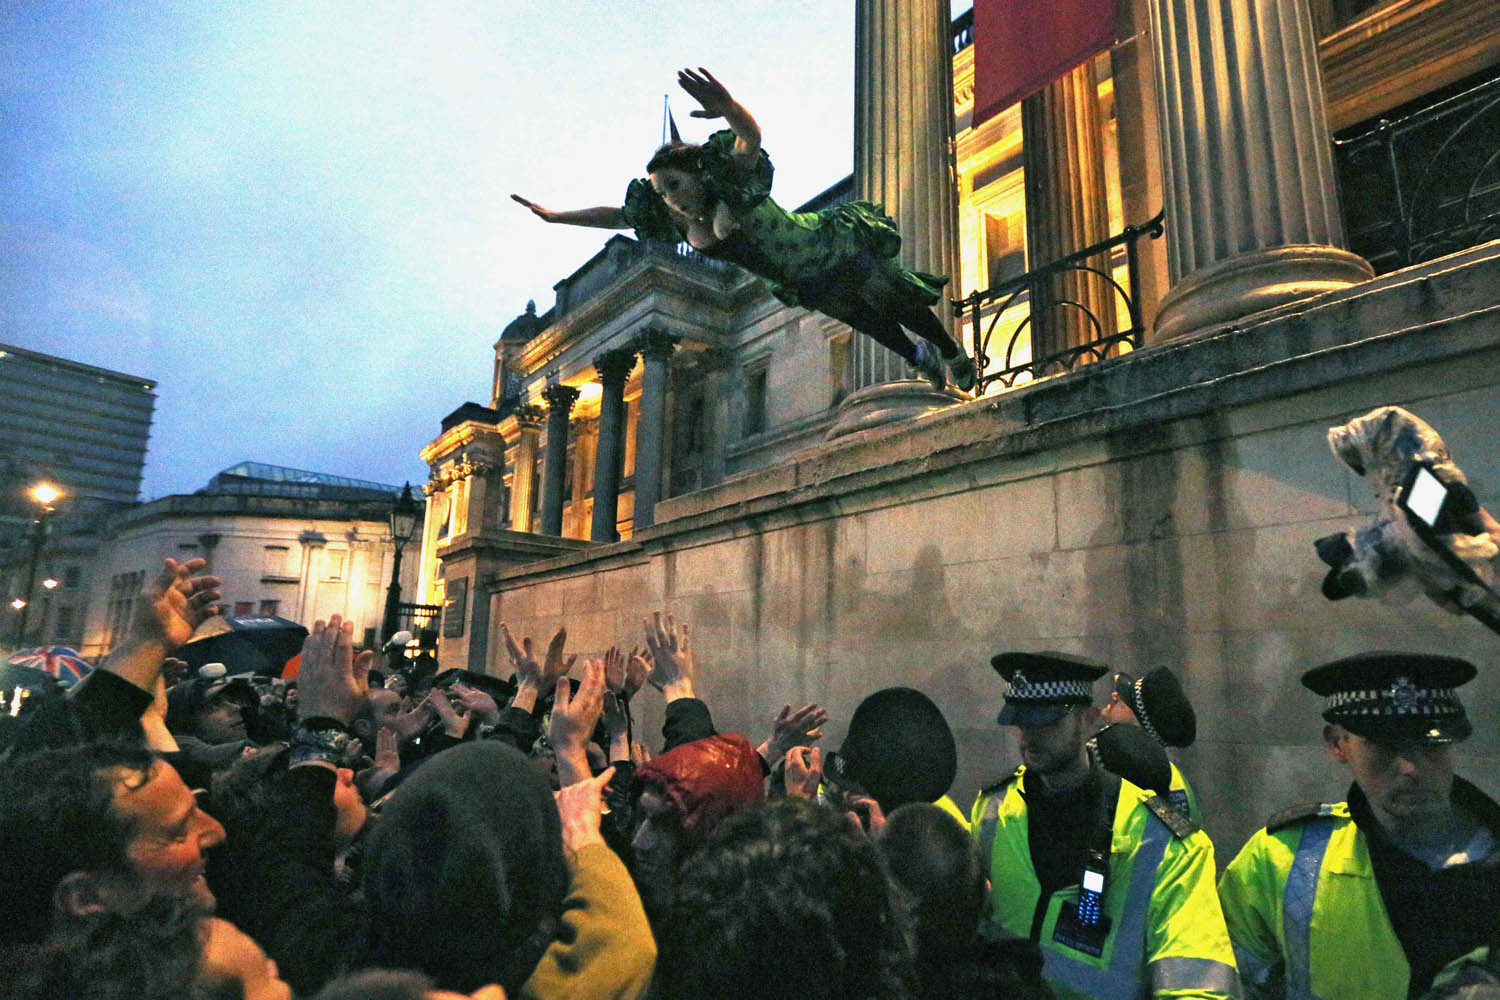 April 13, 2013. A reveller who had climbed onto a ledge outside the National Gallery leaps into the crowd during an outdoor party celebrating the death of former British Prime Minister Margaret Thatcher, at Trafalgar Square in central London.